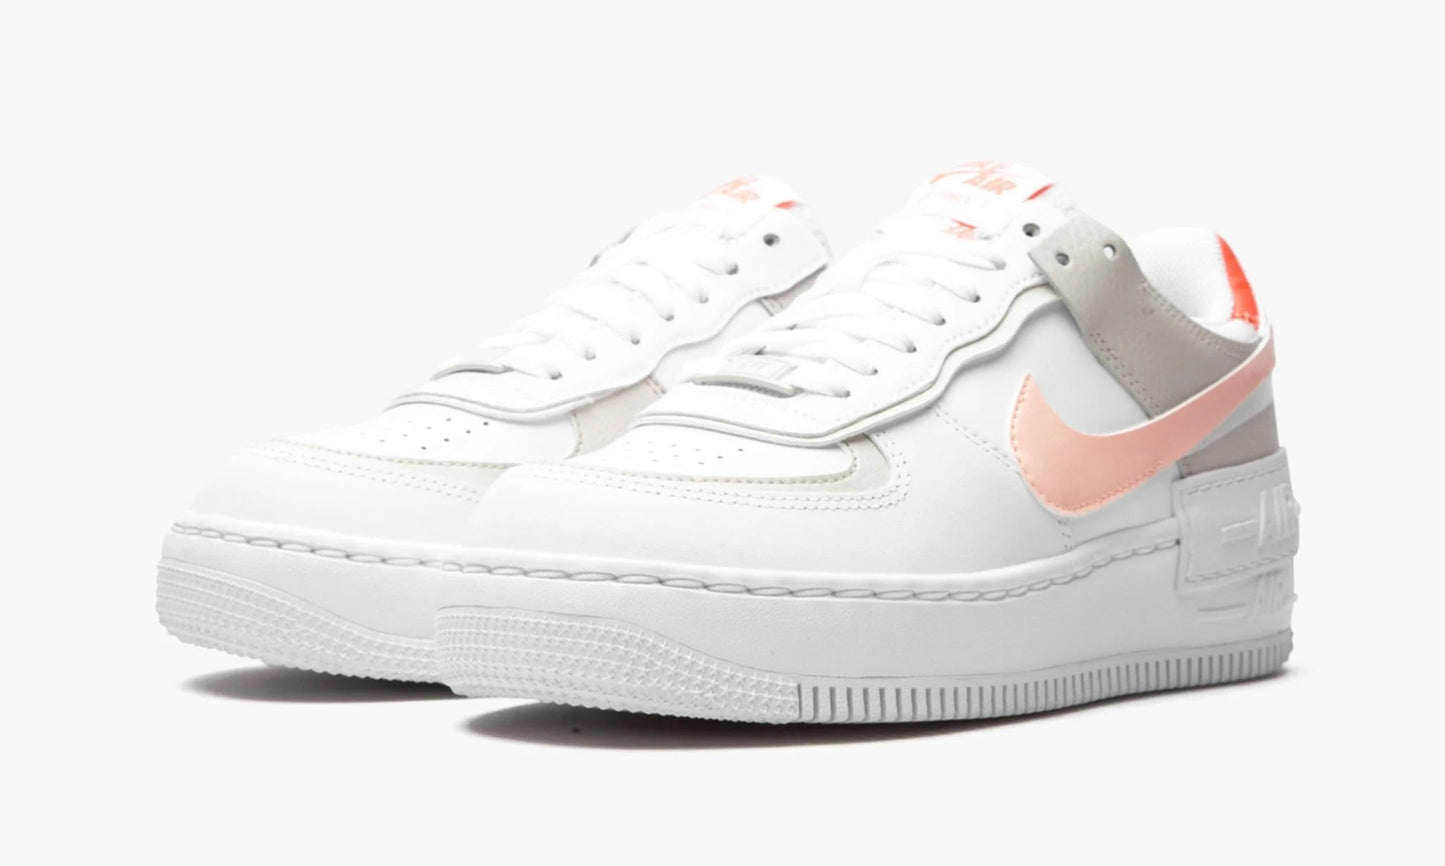 Air Force 1 Low Shadow Crimson Tint - DH3896 100 | The Sortage